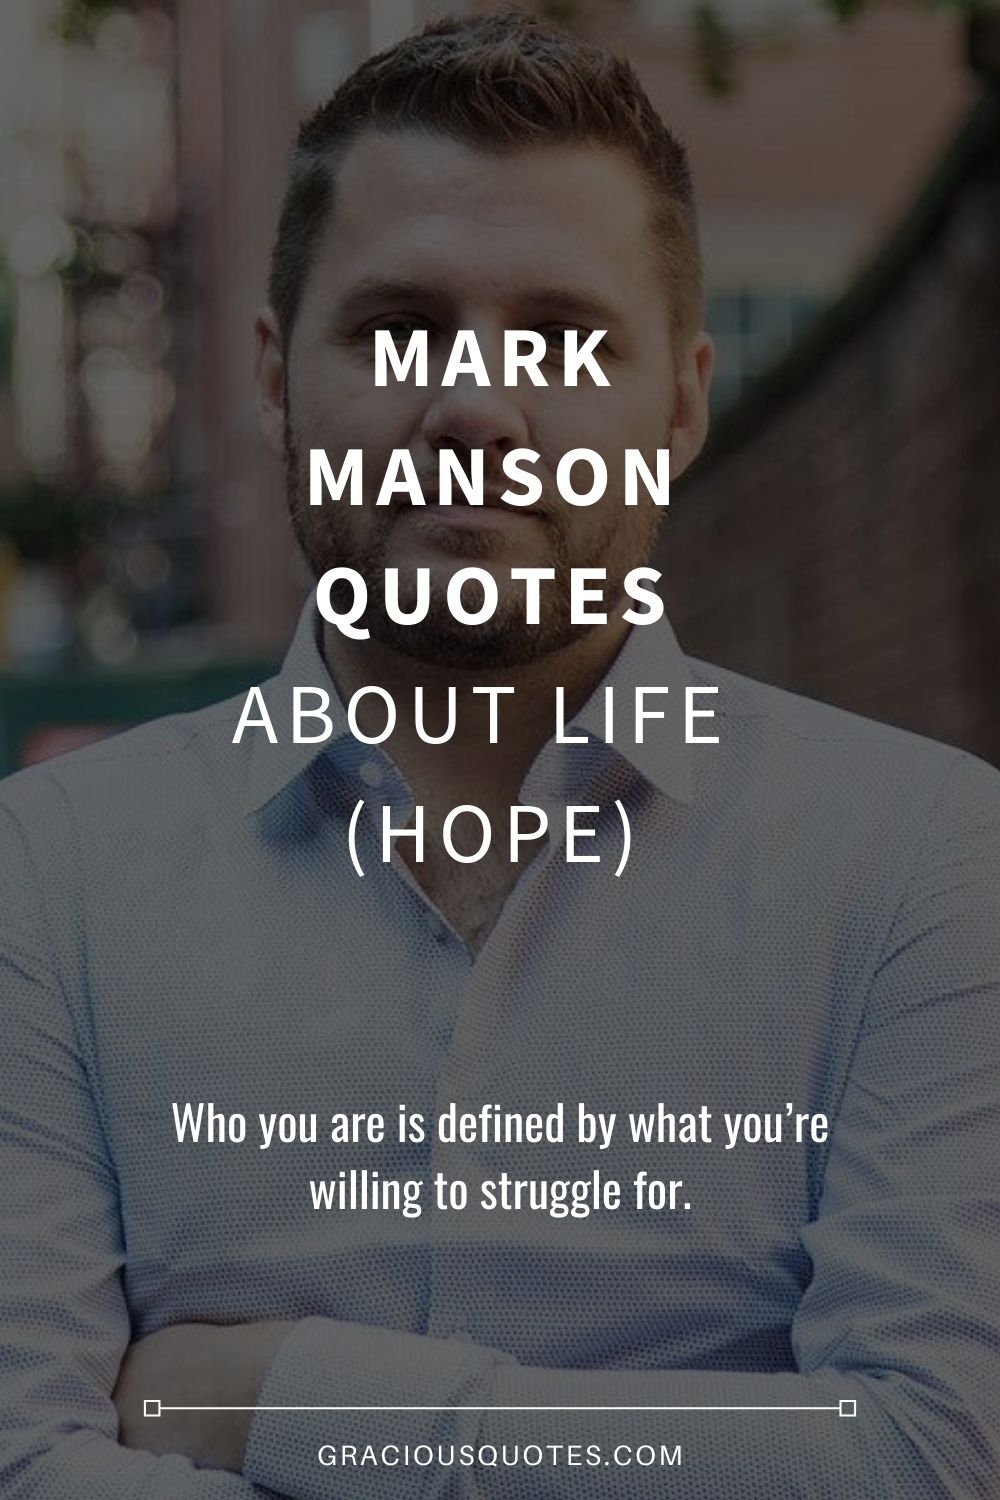 Mark Manson Quotes About Life (HOPE) - Gracious Quotes